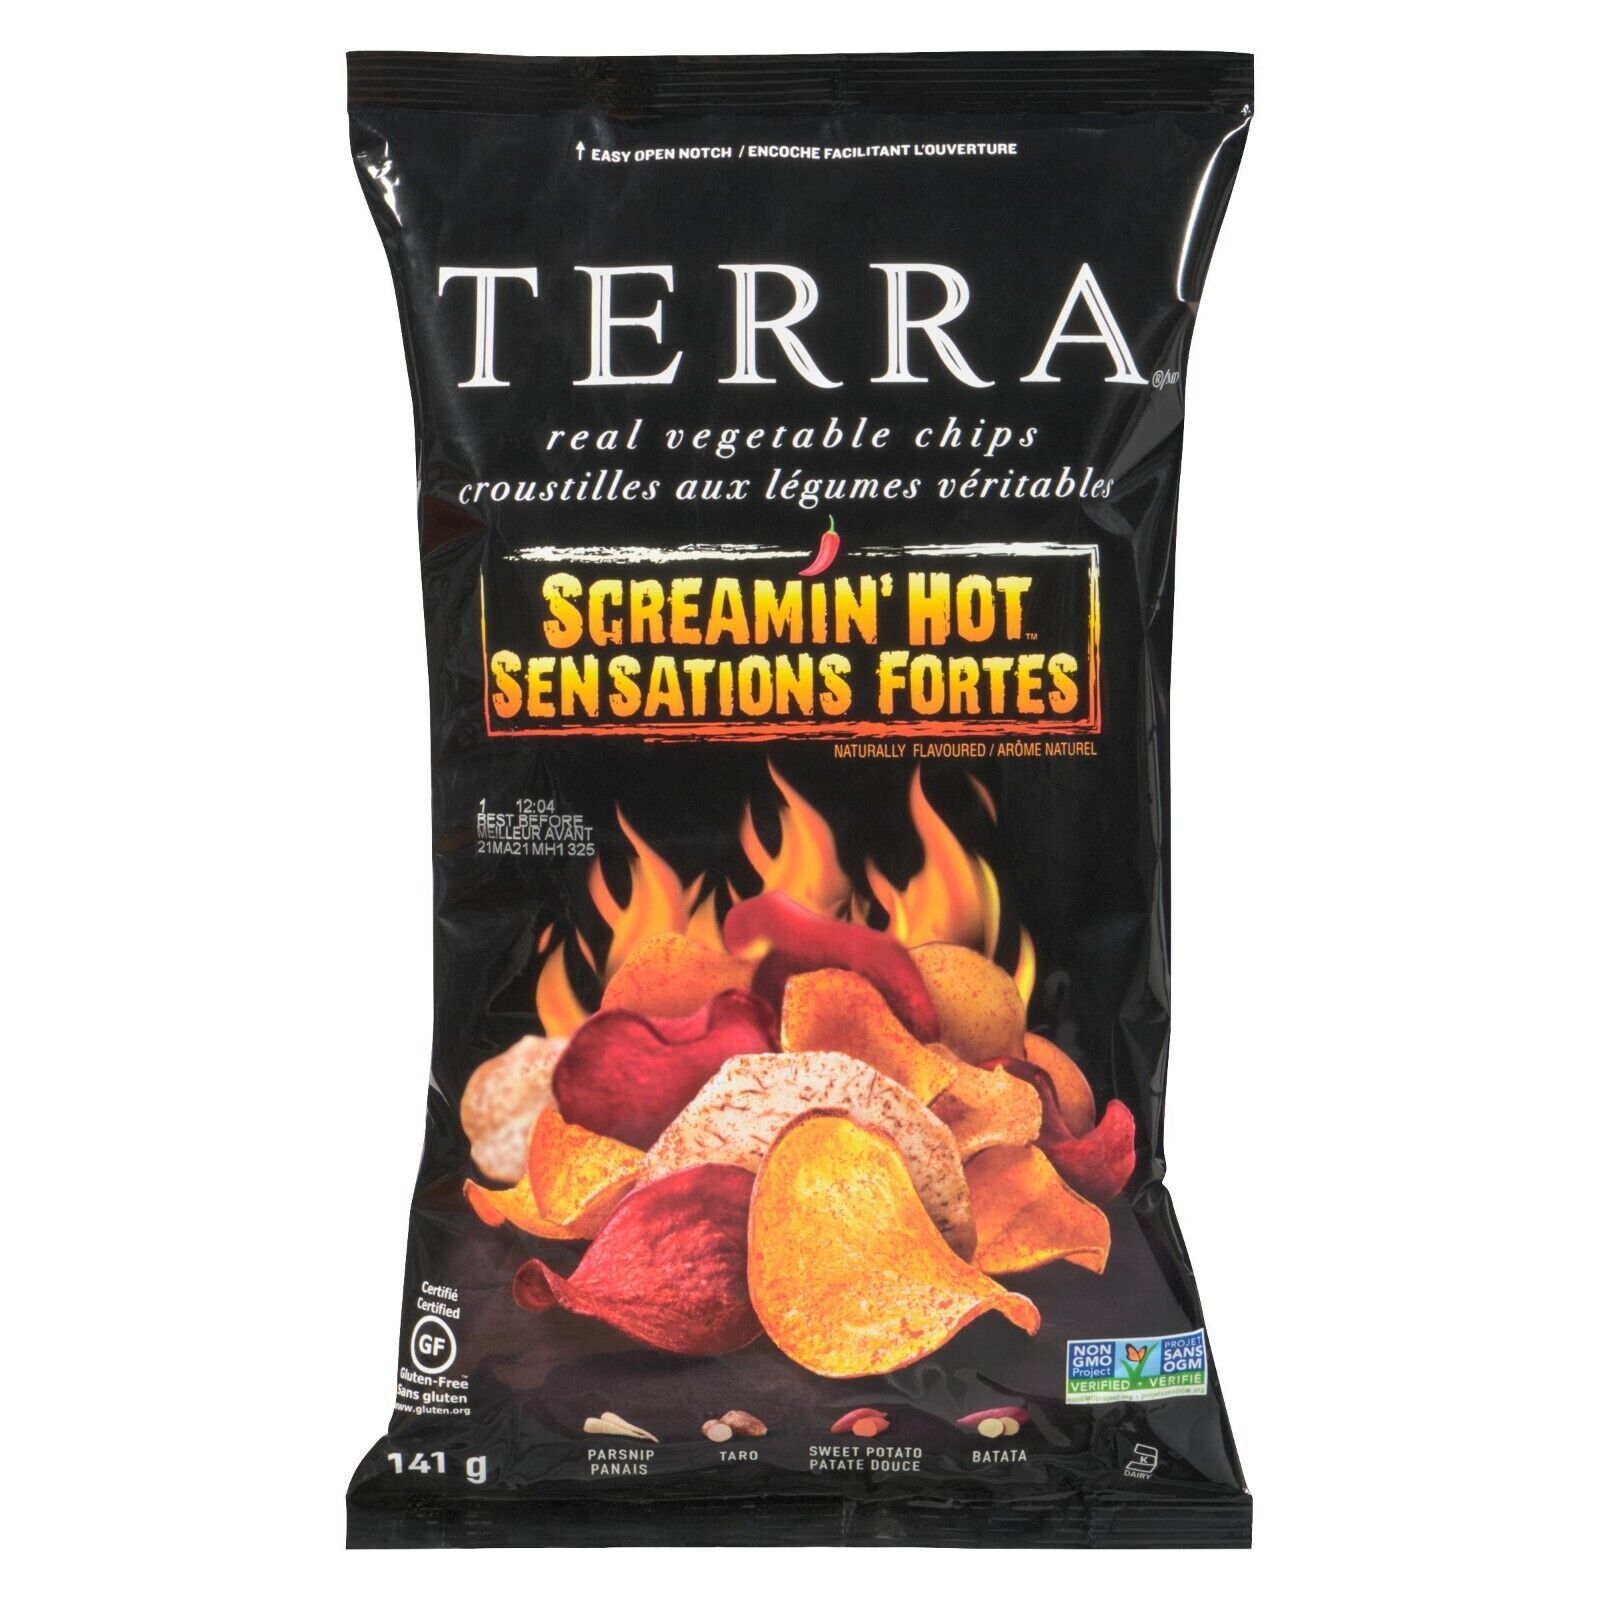 4 Bags of Terra Real Vegetable Chips - Screamin' Hot - 141g Each - Free Shipping - $37.74